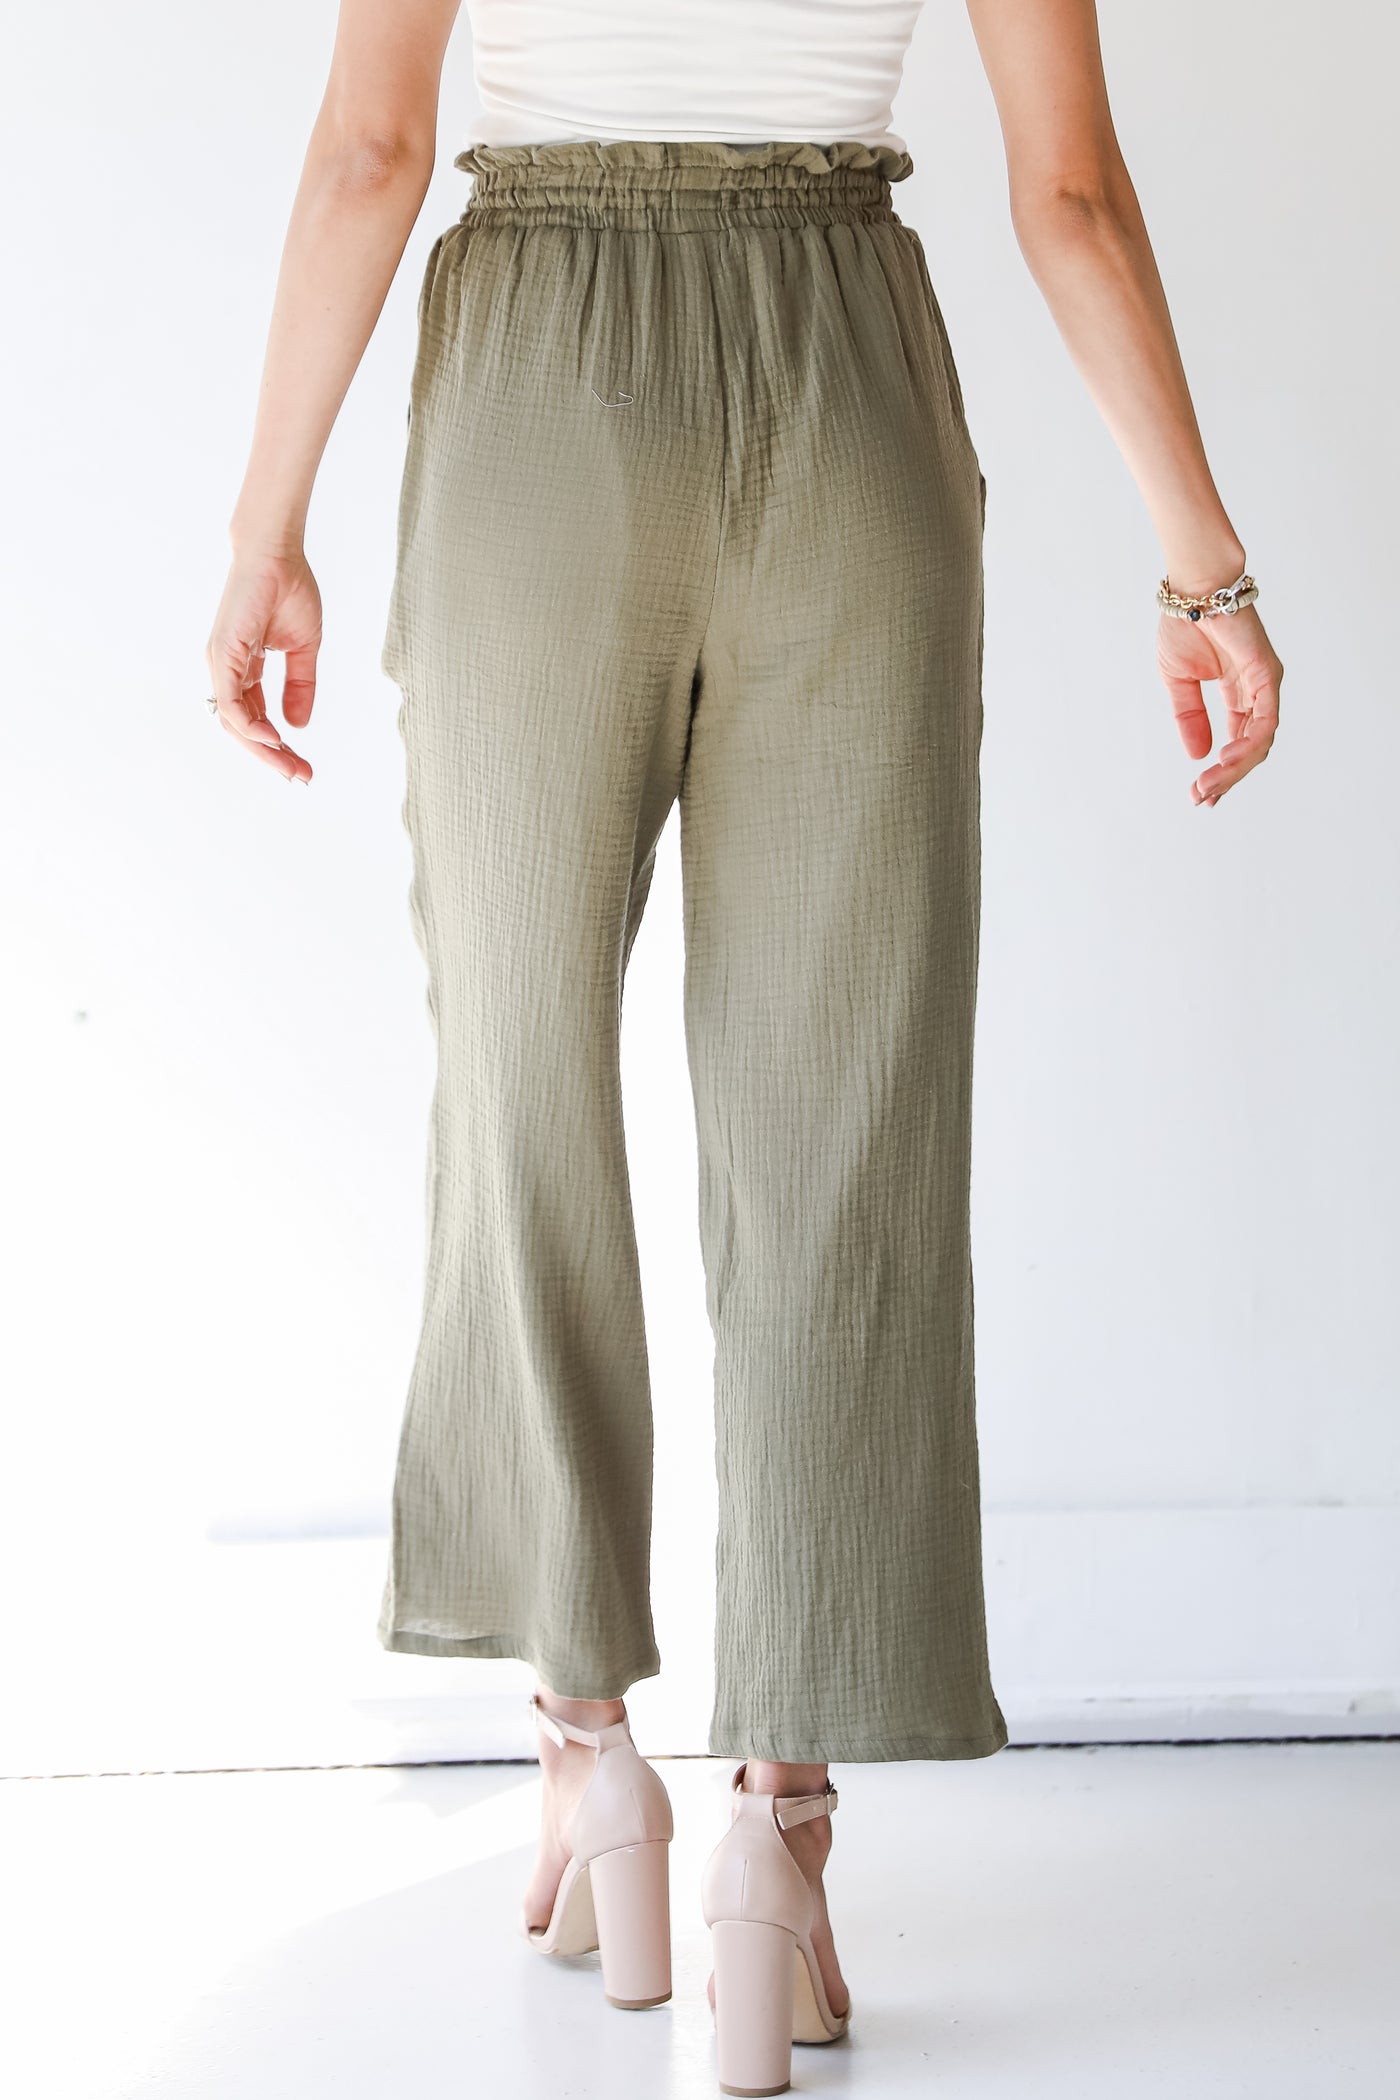 back view of olive pants